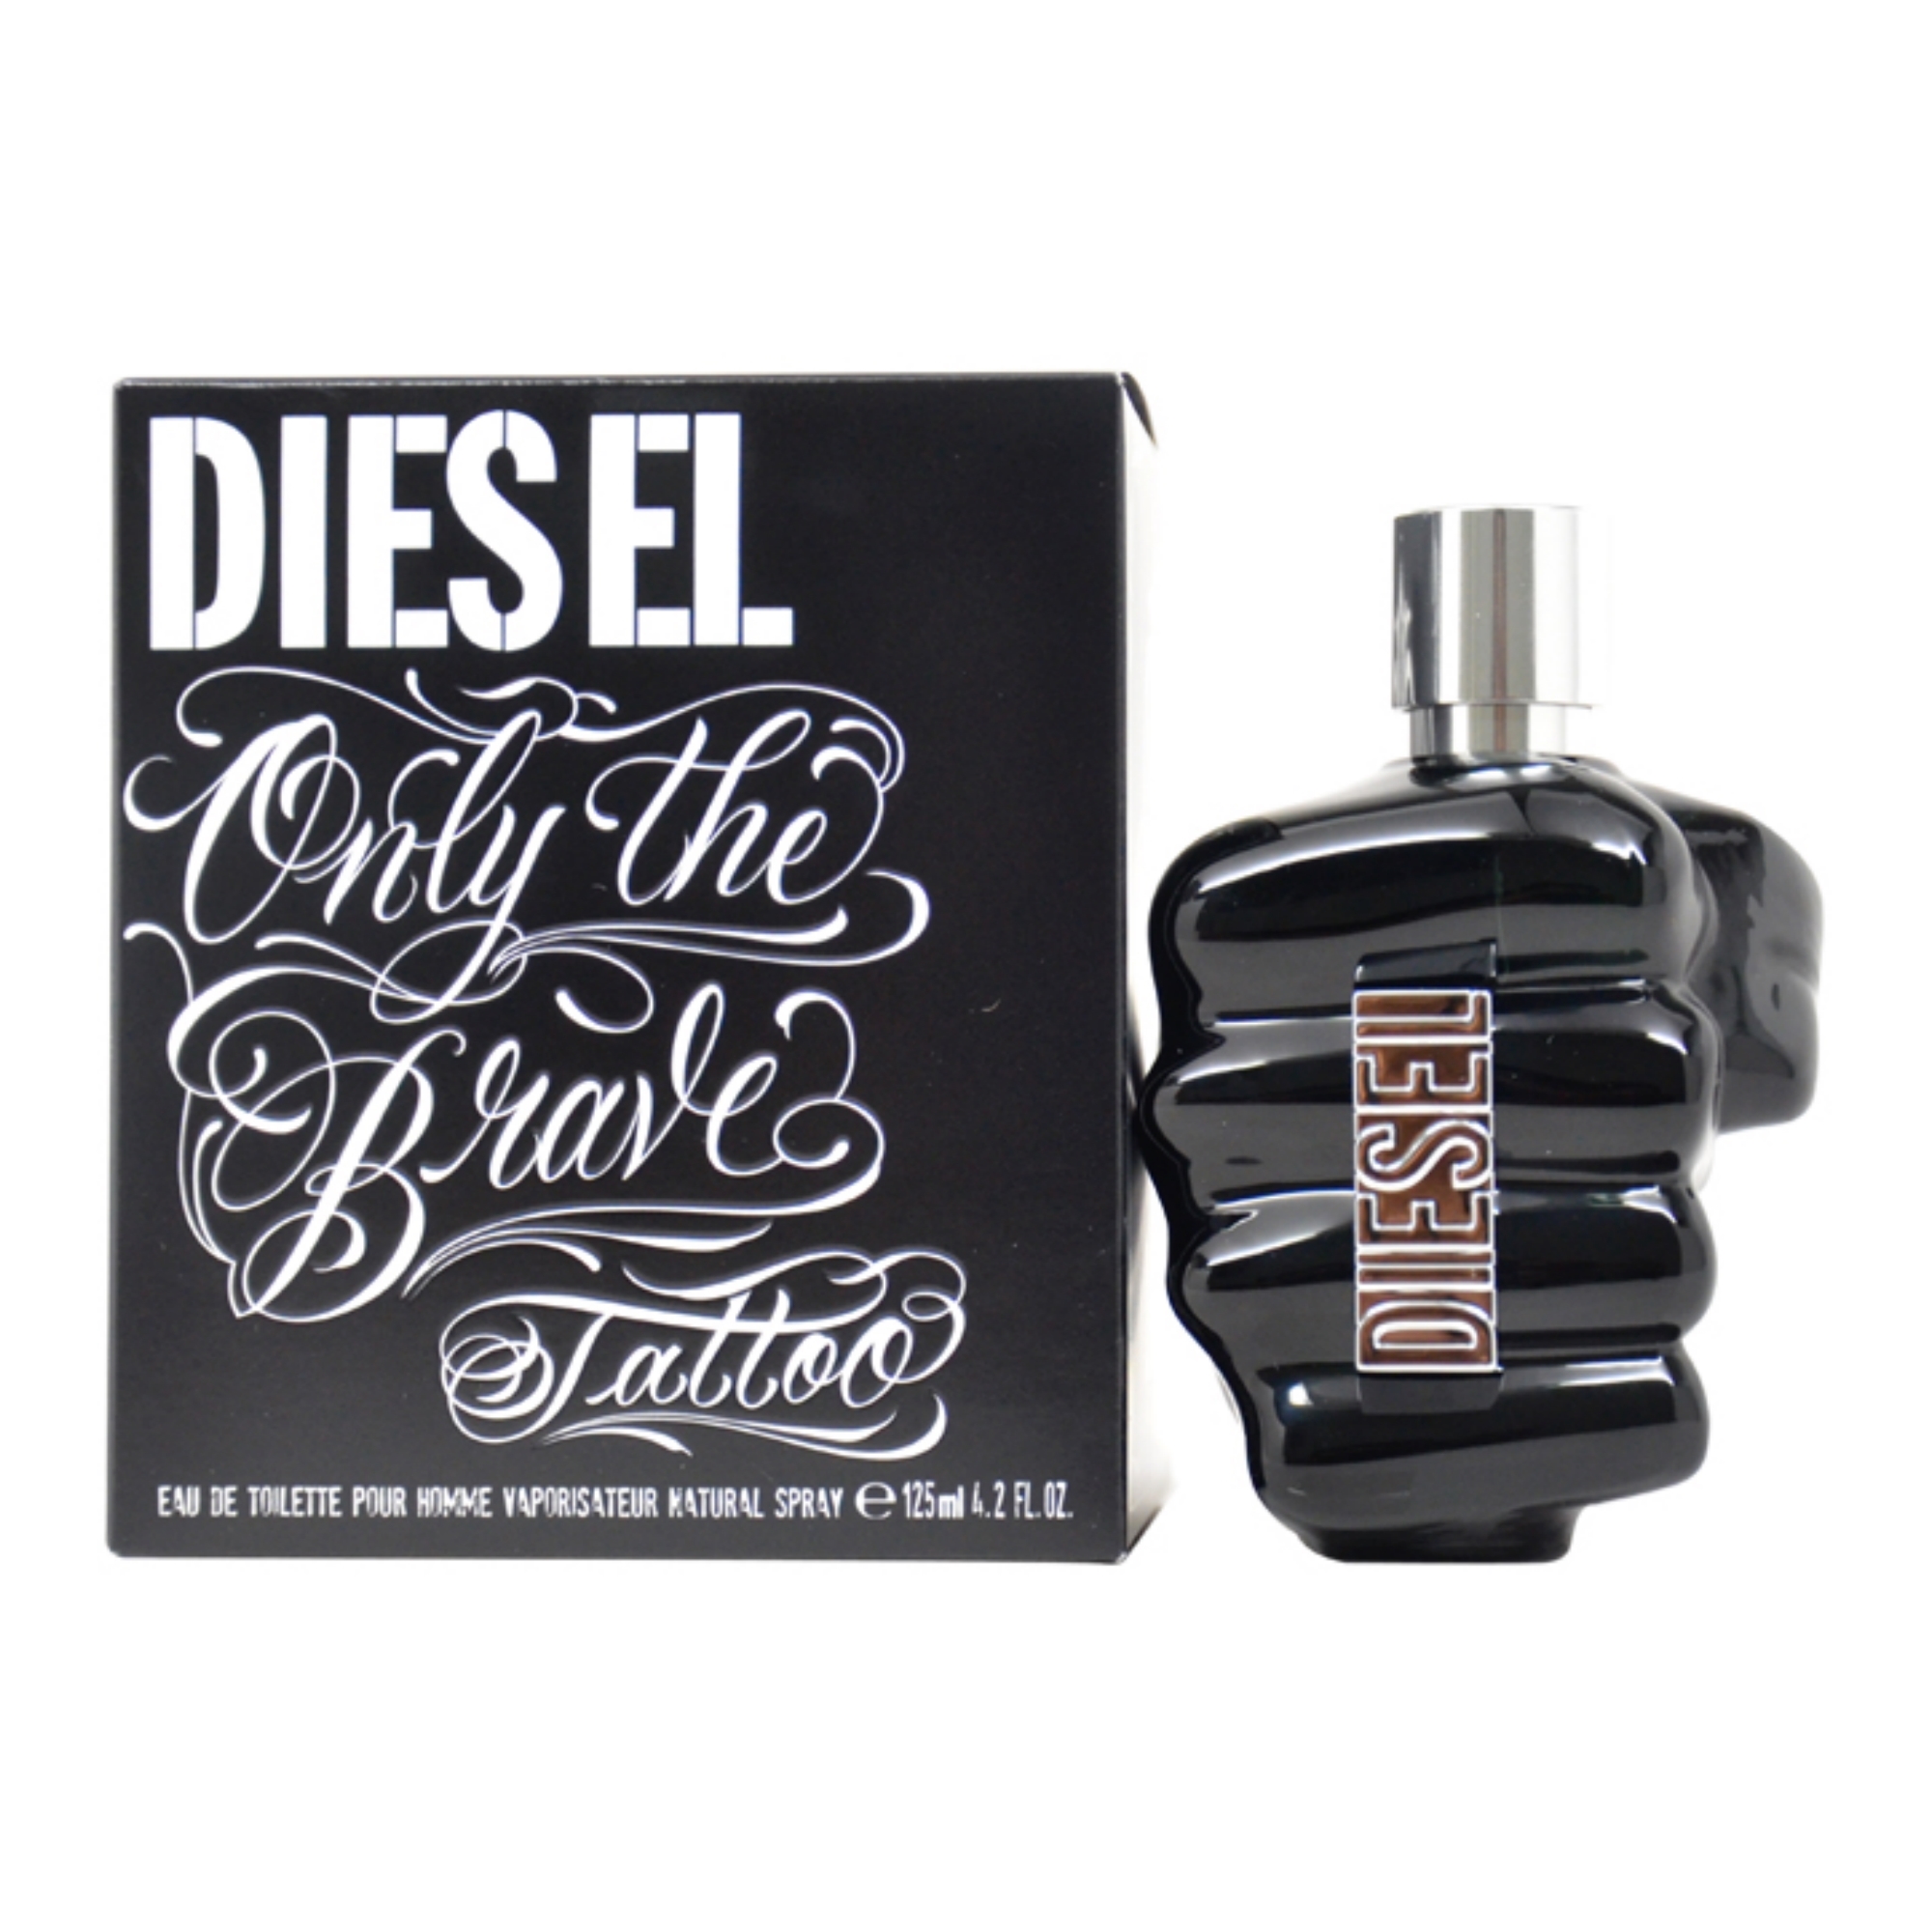 Only The Brave Tattoo by Diesel for Men - 4.2 oz EDT Spray